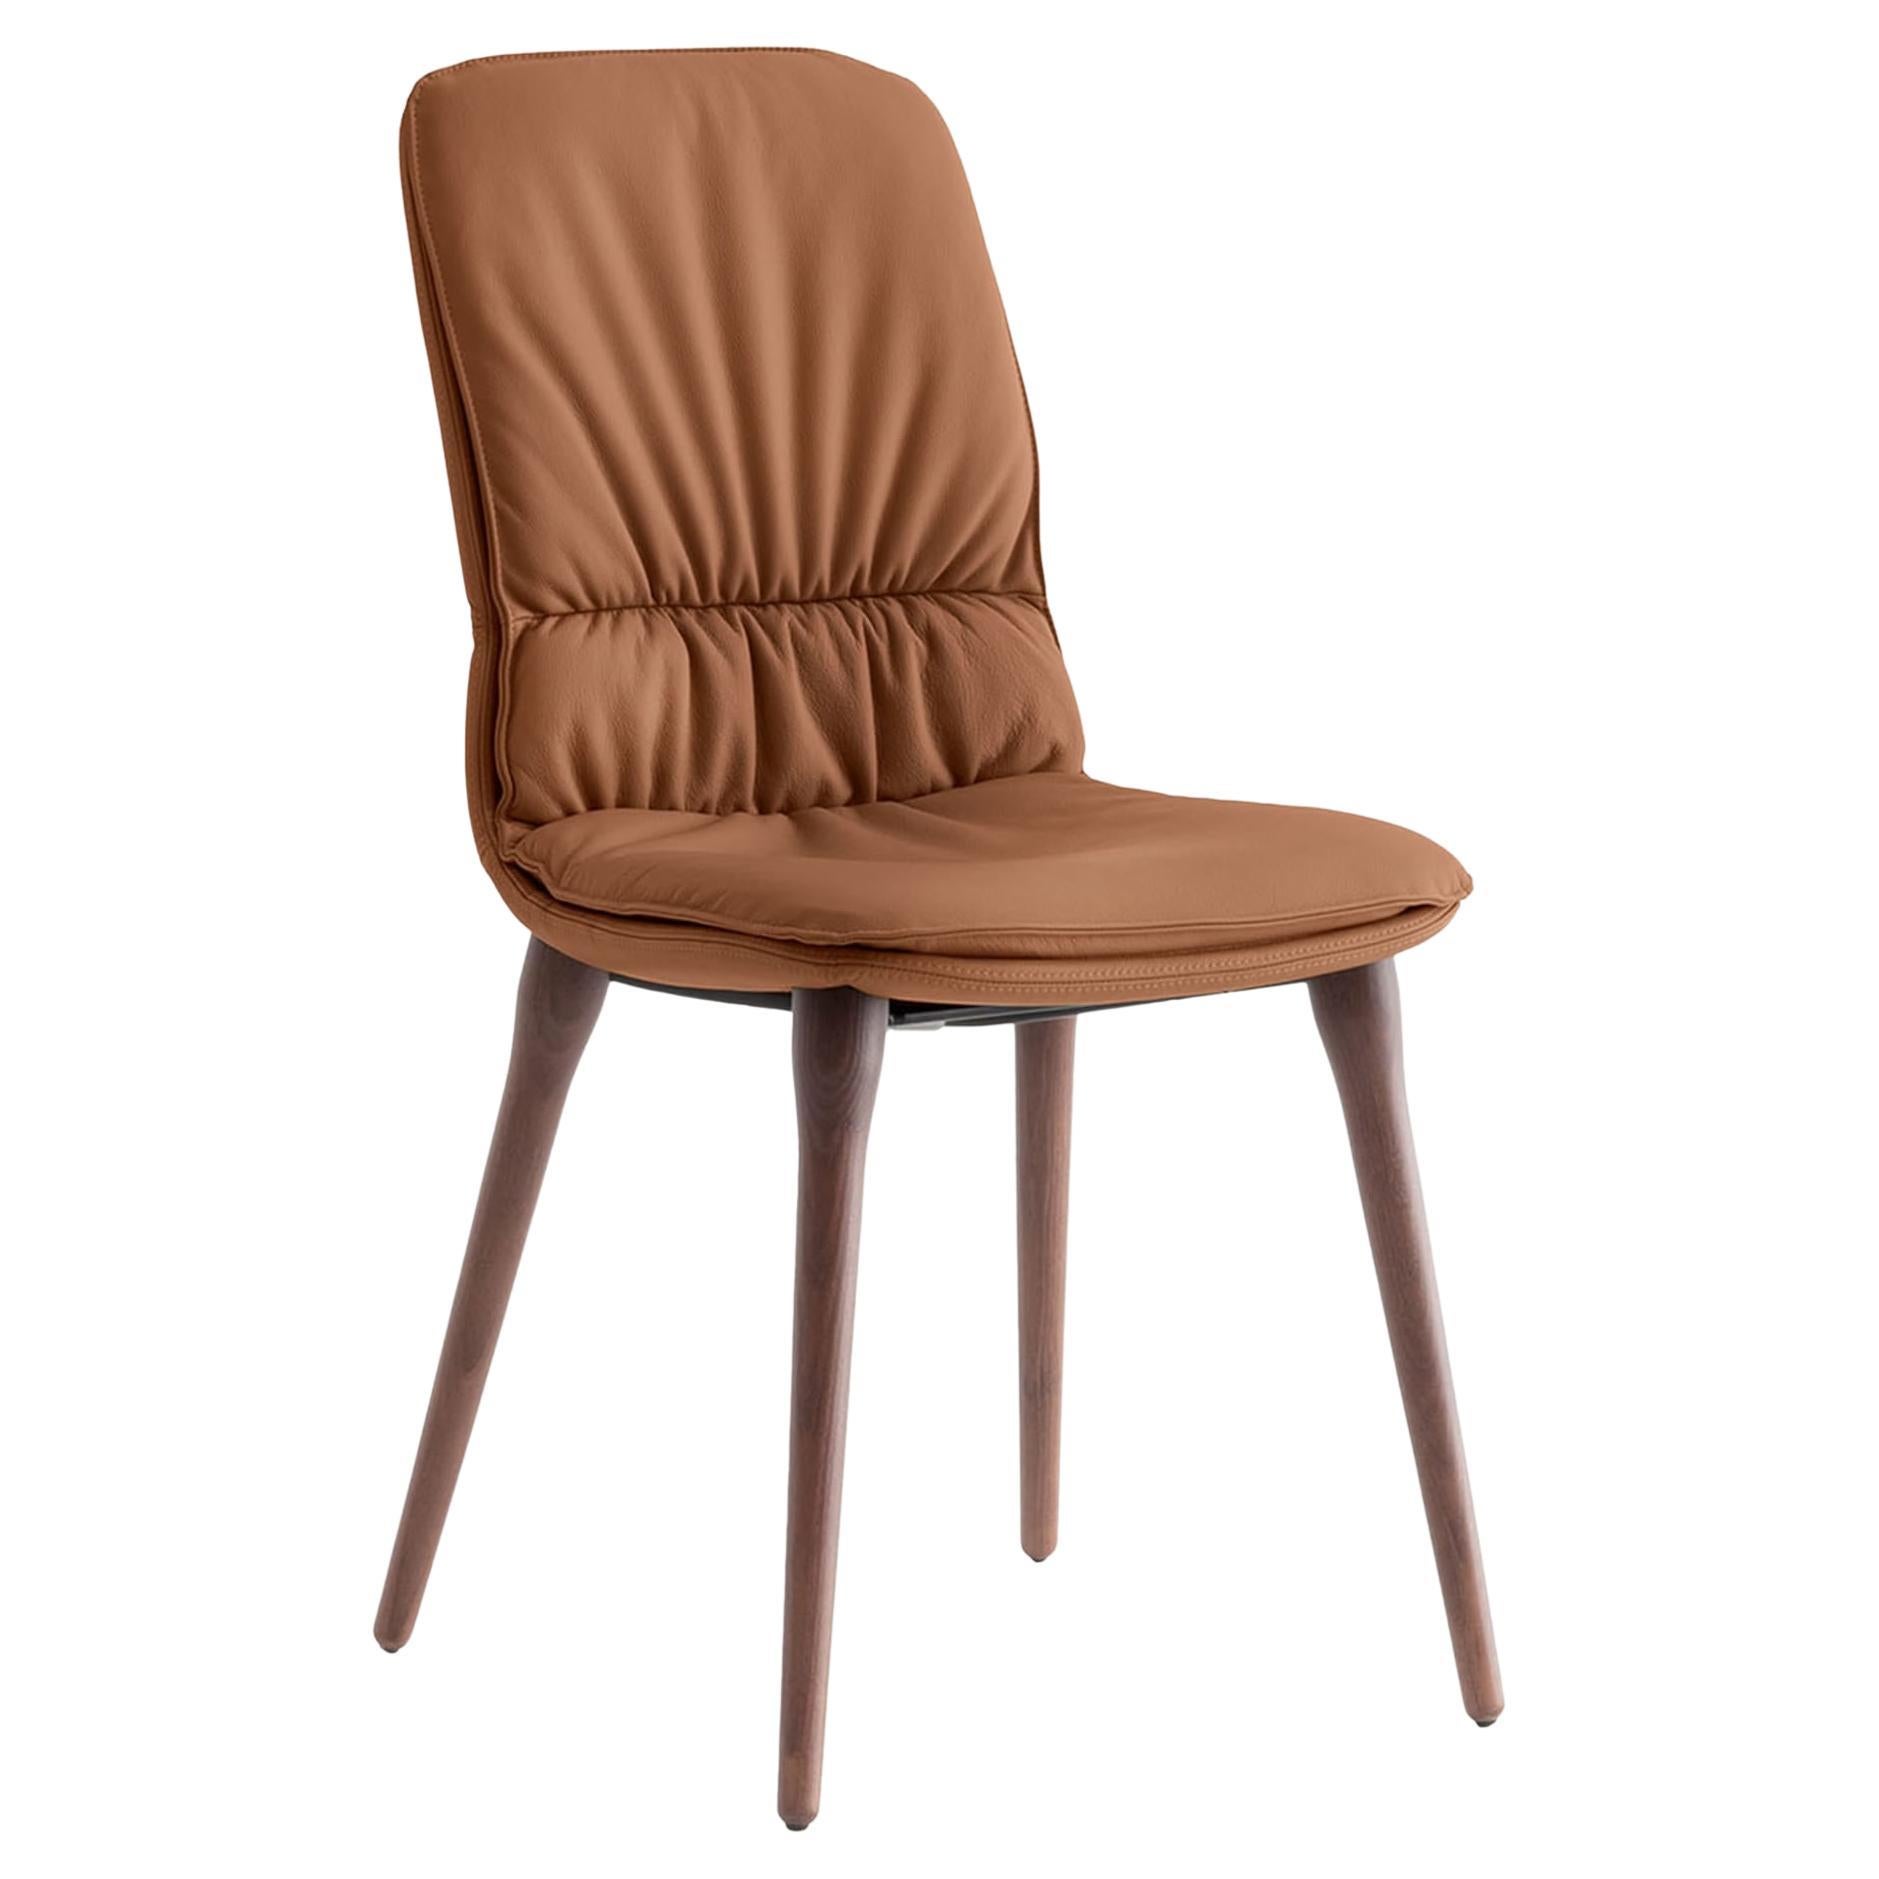 Coco Cognac-Toned Leather Chair